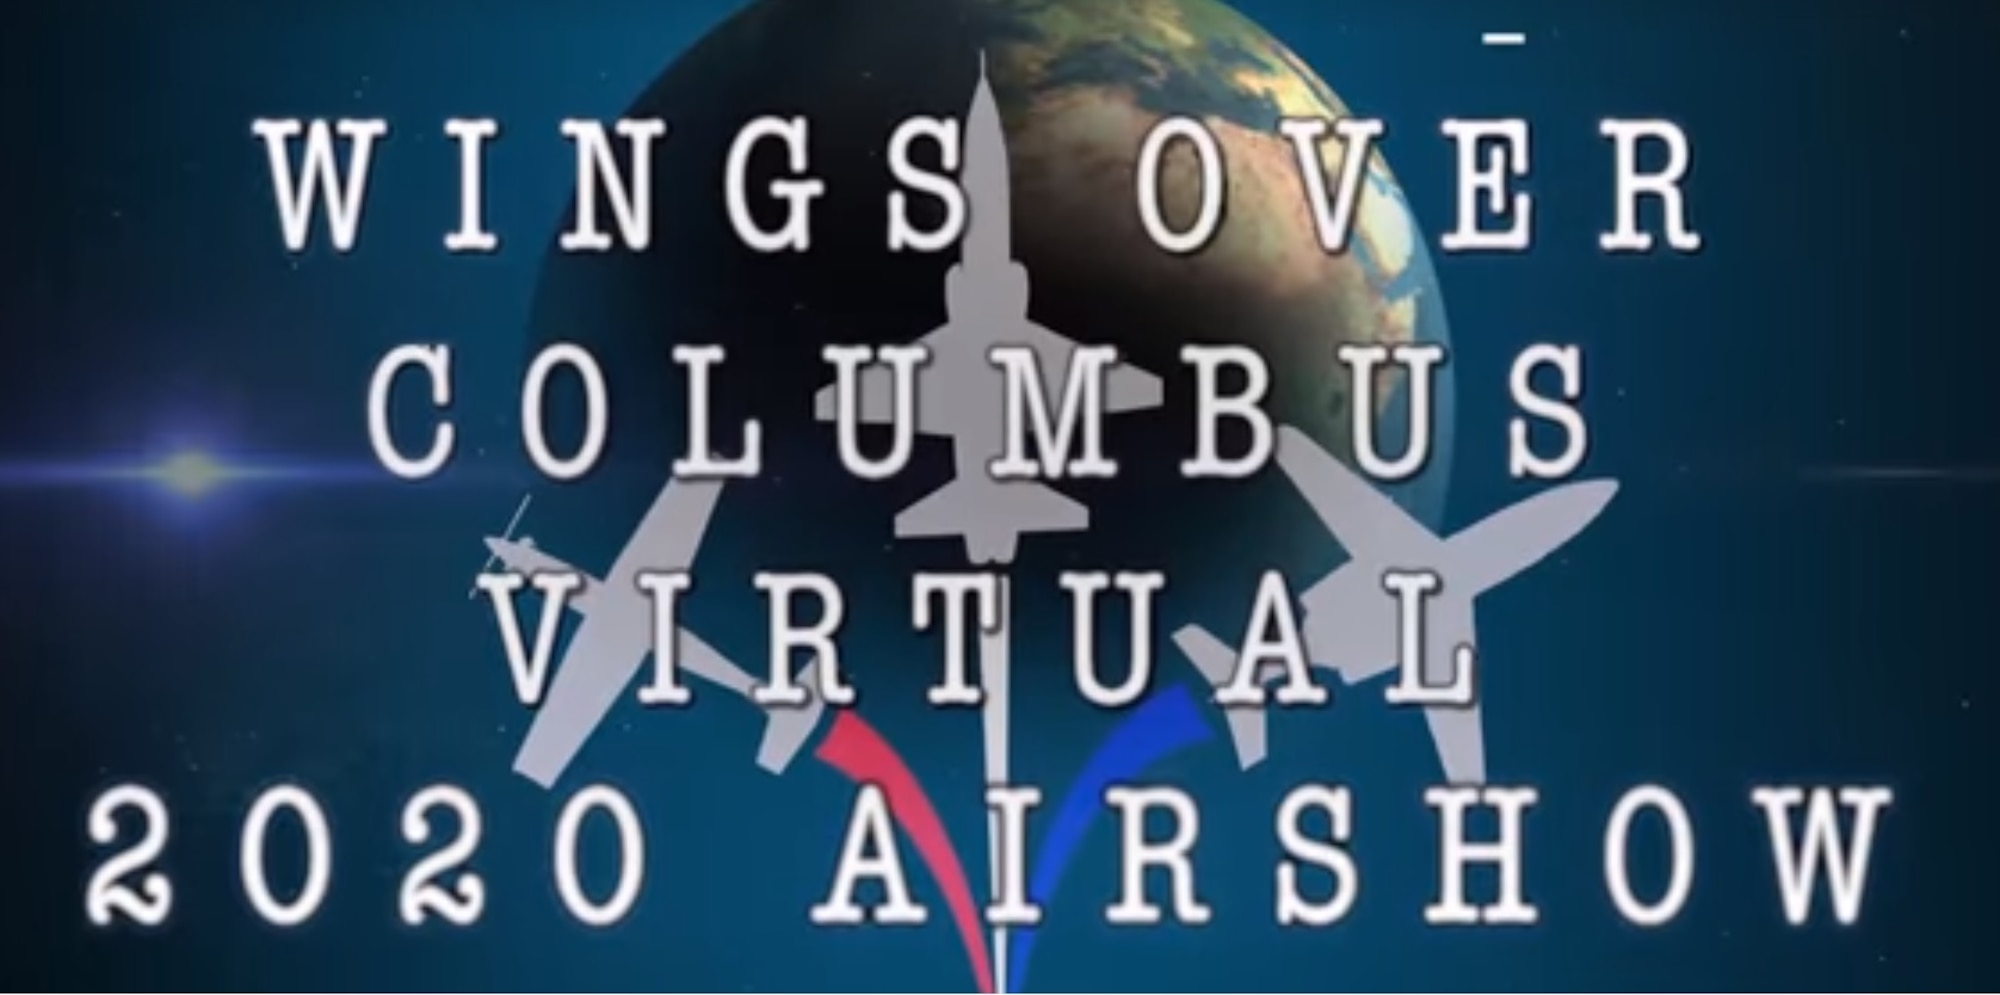 Columbus AFB hosts Wings Over Columbus virtual air show on social media